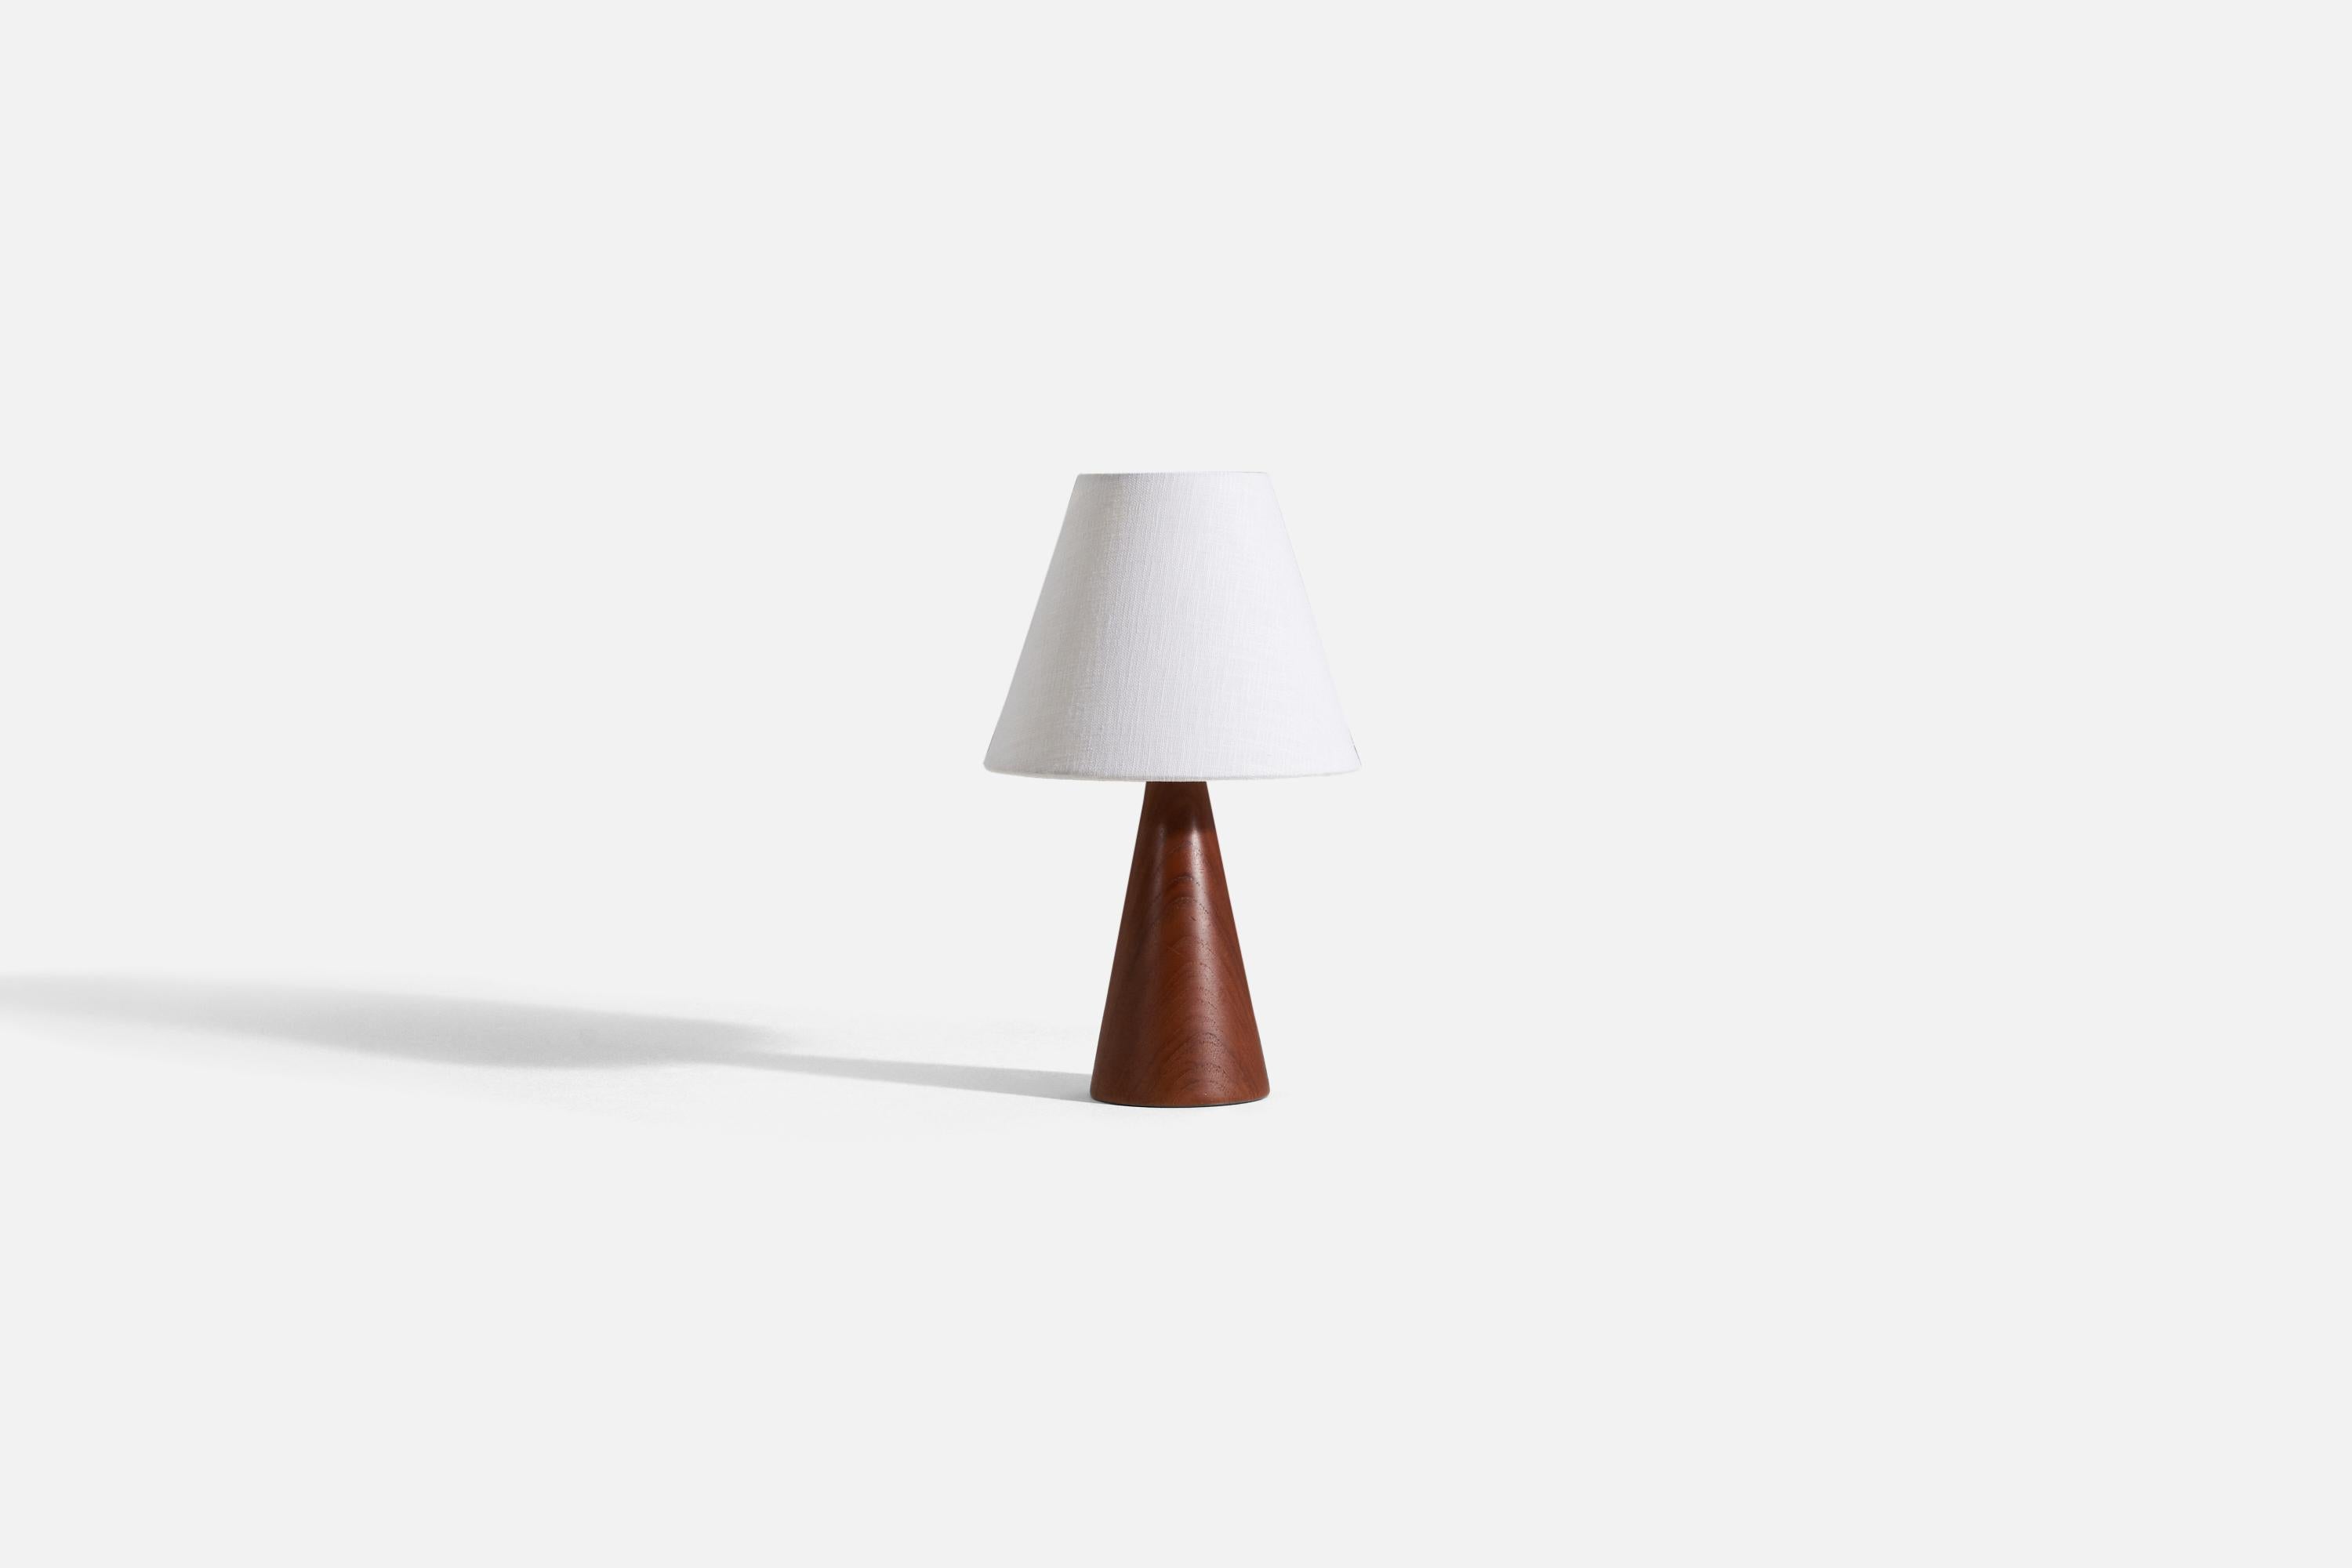 A teak table lamp designed and produced by a Swedish designer, Sweden, 1960s.

Sold without lampshade. 
Dimensions of lamp (inches) : 10.5 x 3.875 x 3.875 (H x W x D).
Dimensions shade (inches) : 4 x 8 x 6.5 (T x B x H).
Dimension of lamp with